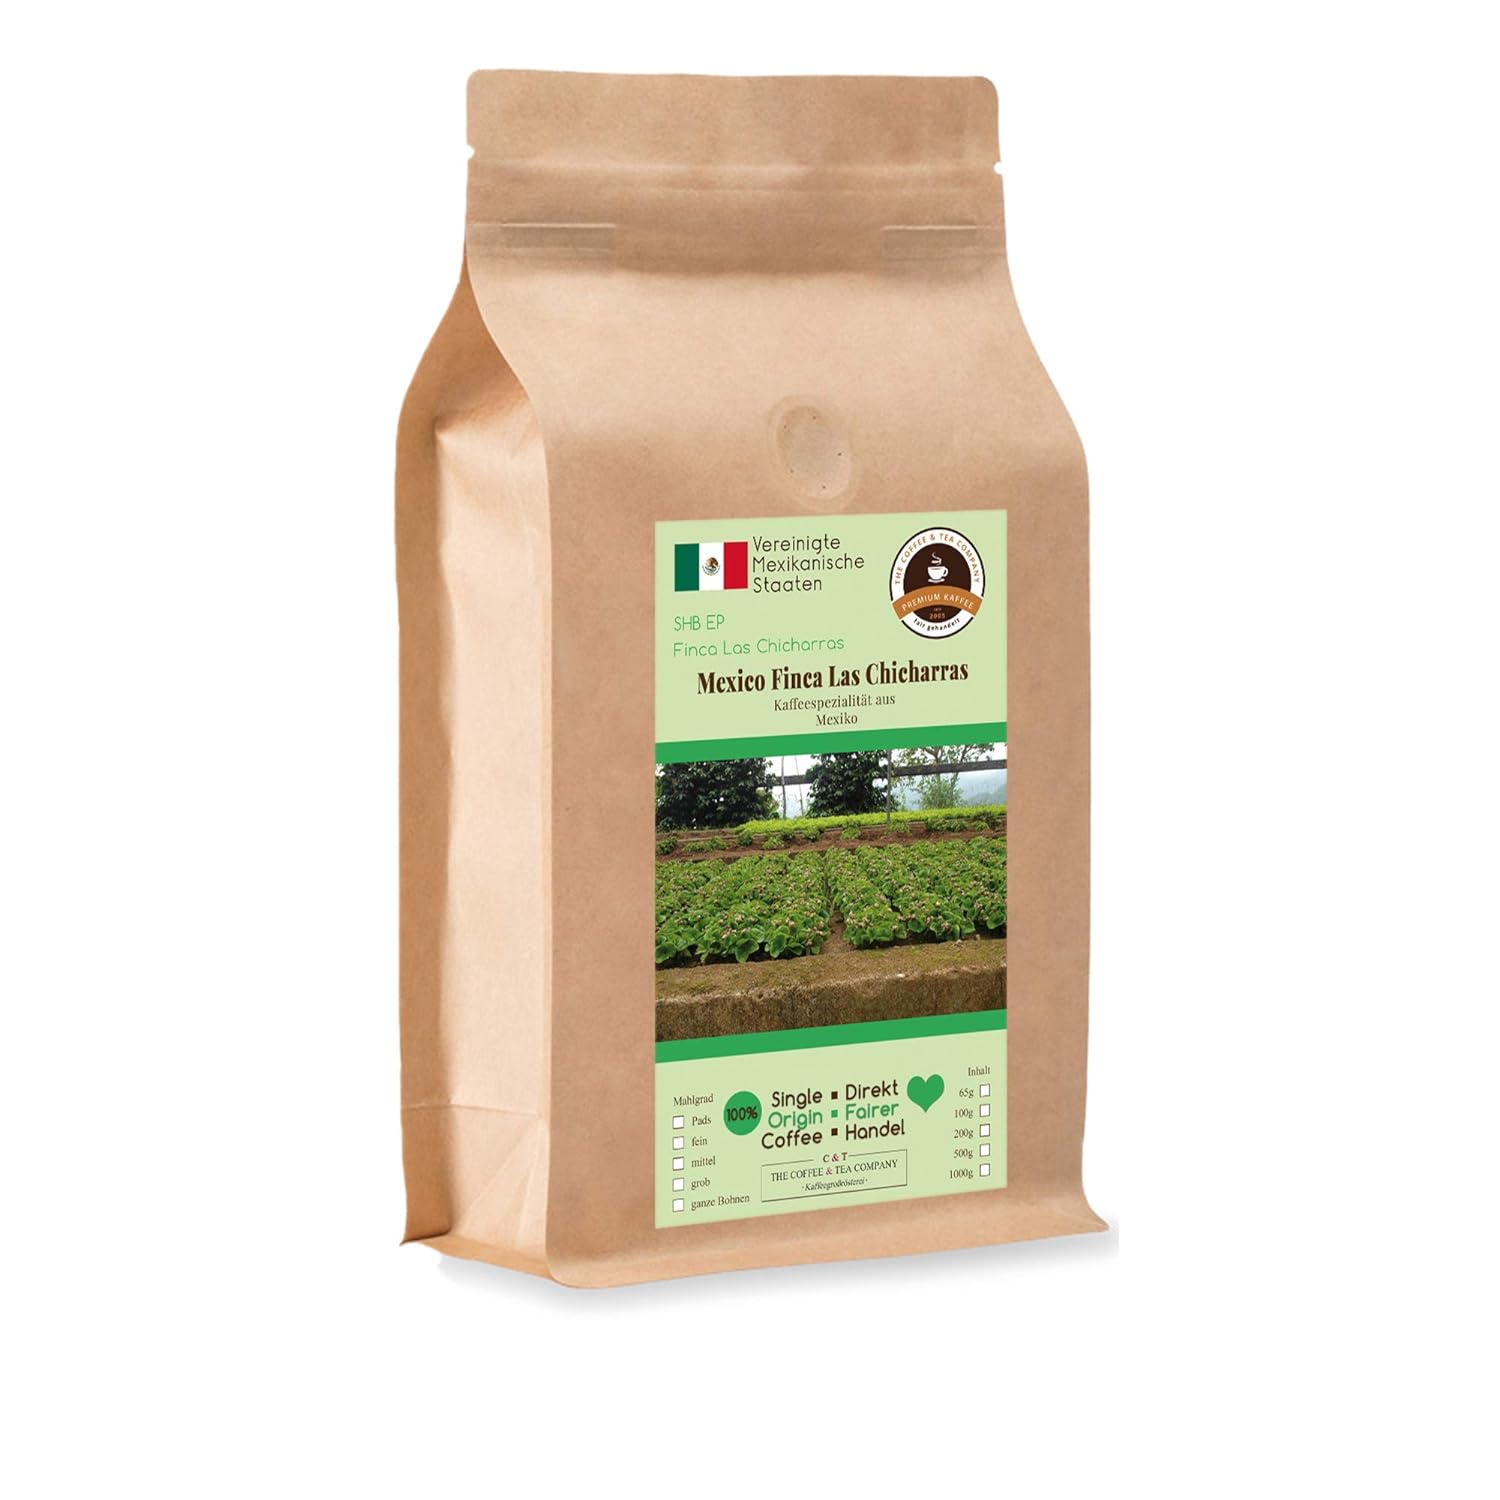 Coffee Globetrotter - Coffee with Heart - Mexico Finca Las Chicharras - 500 g Medium Ground - for Coffee Filter Machine, Hand Filter - Top Coffee Fair Trade Supports Social Projects